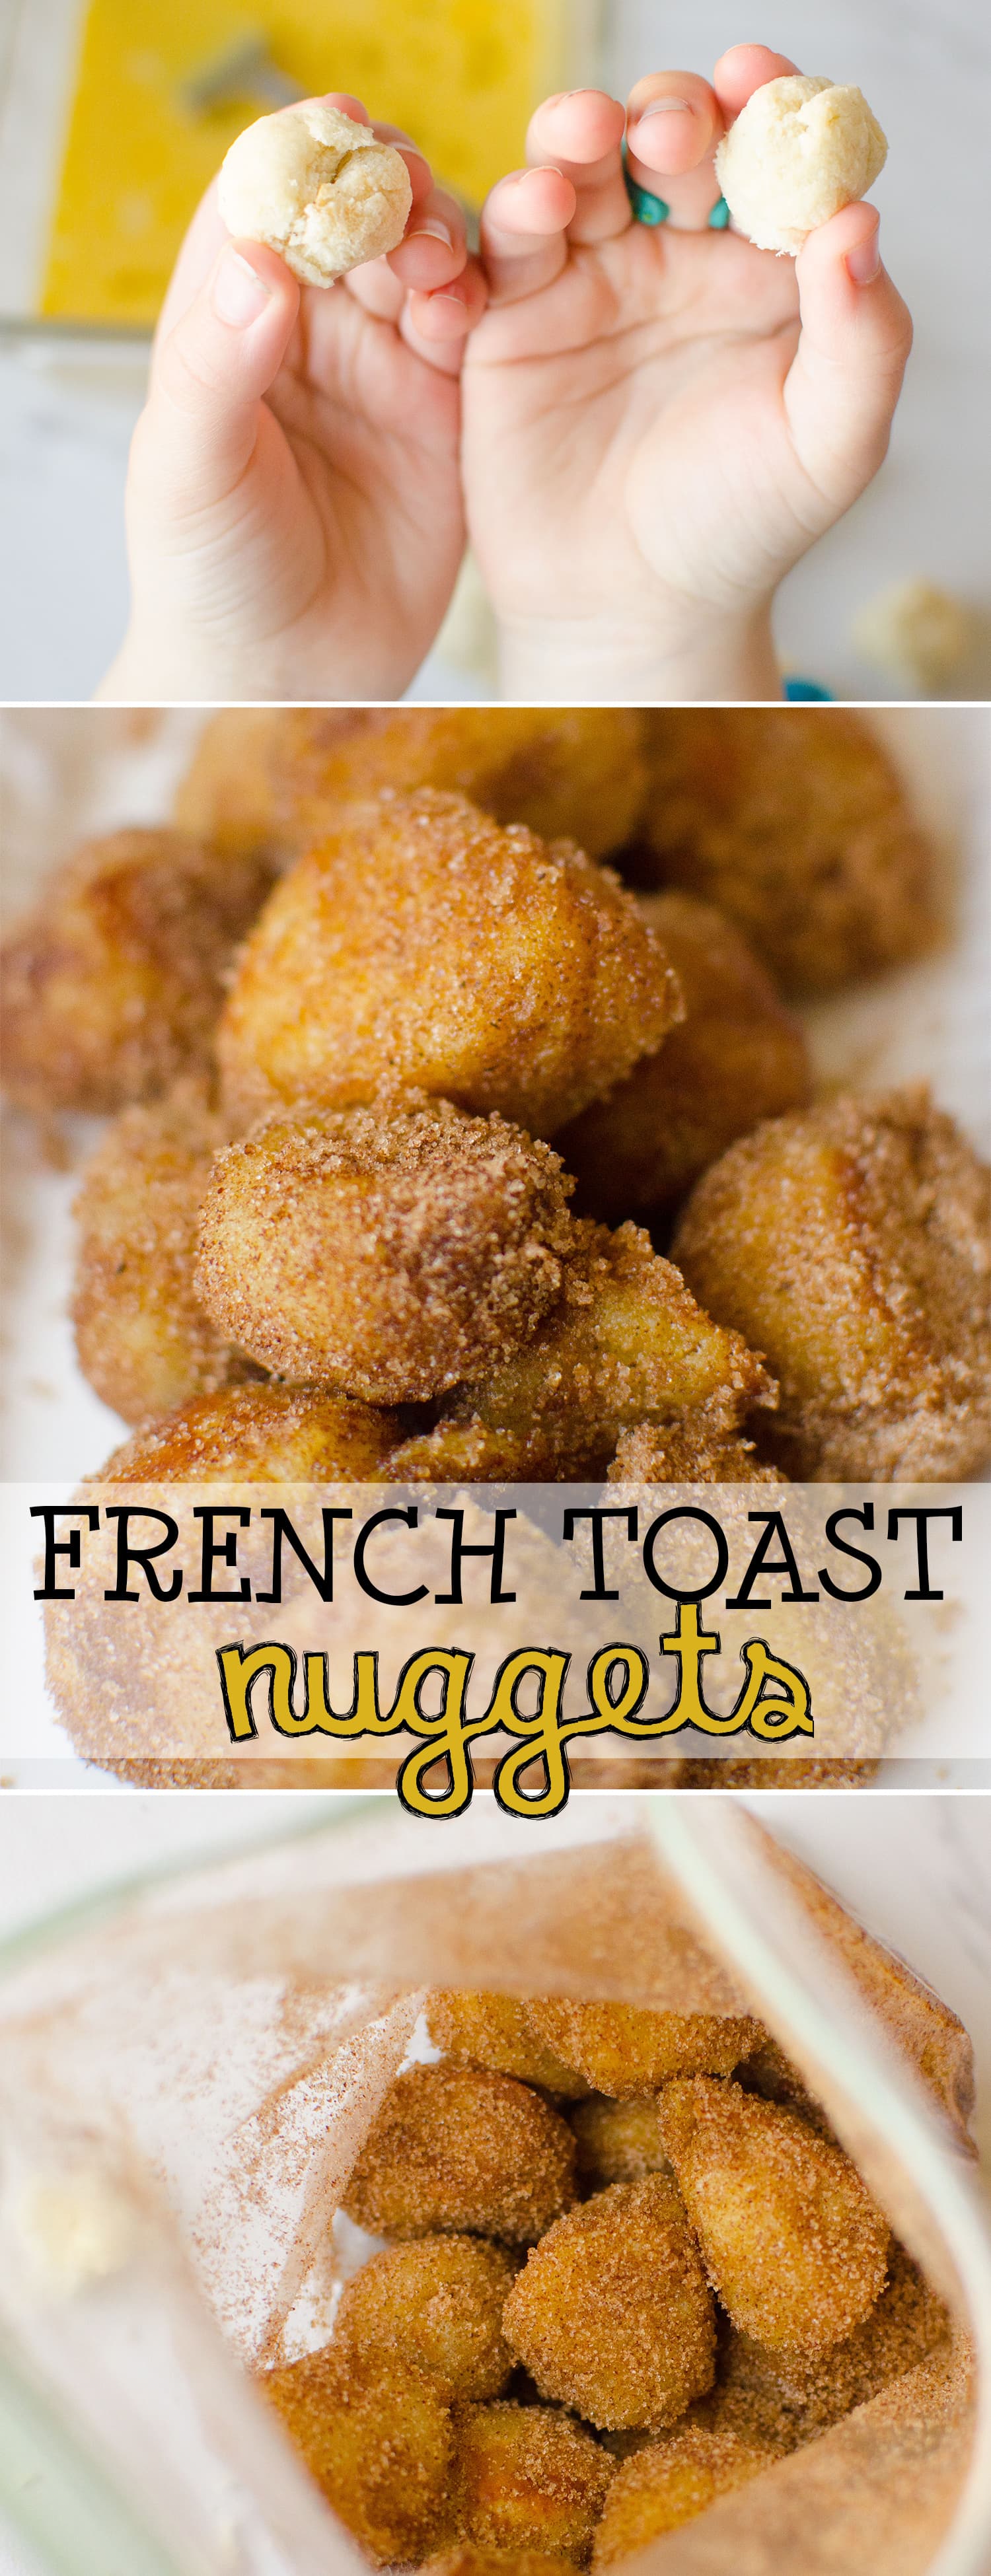  French Toast Nuggets are small, bite-sized pieces of french toast. They're dipped in egg and fried crispy-brown, and covered with cinnamon and sugar. This is such a fun alternative to regular old French toast! Plus, no forks required! |Cooking with Karli| #frenchtoast #kidcook #nuggets #breakfast #recipe